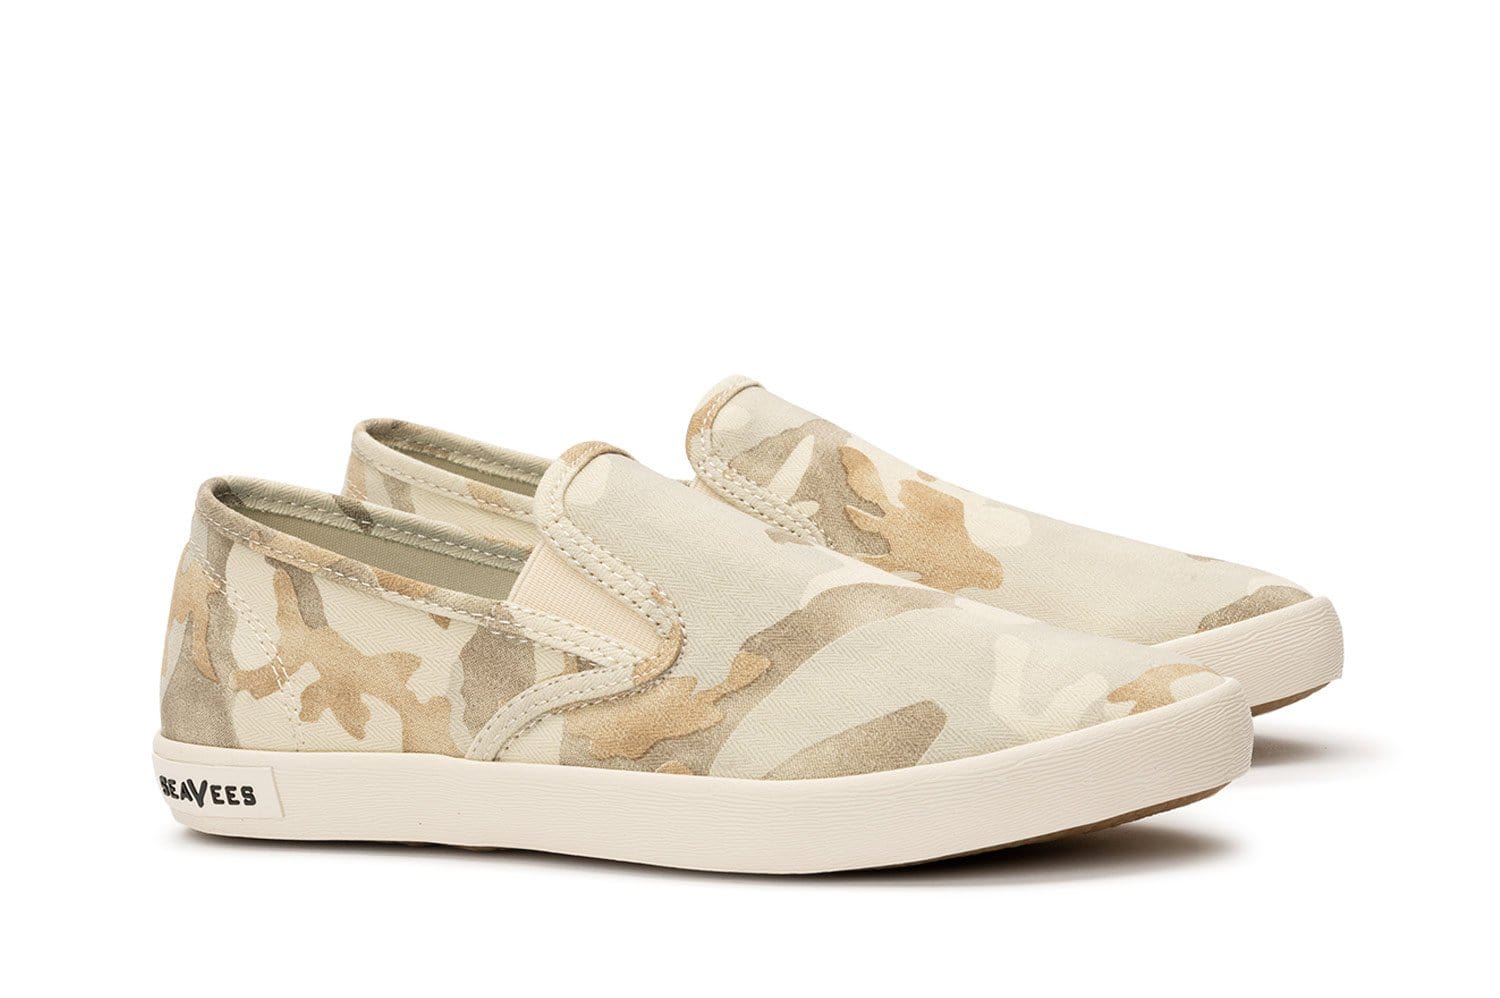 HYBRID in BONE CAMO High Top Sneakers - OTBT shoes